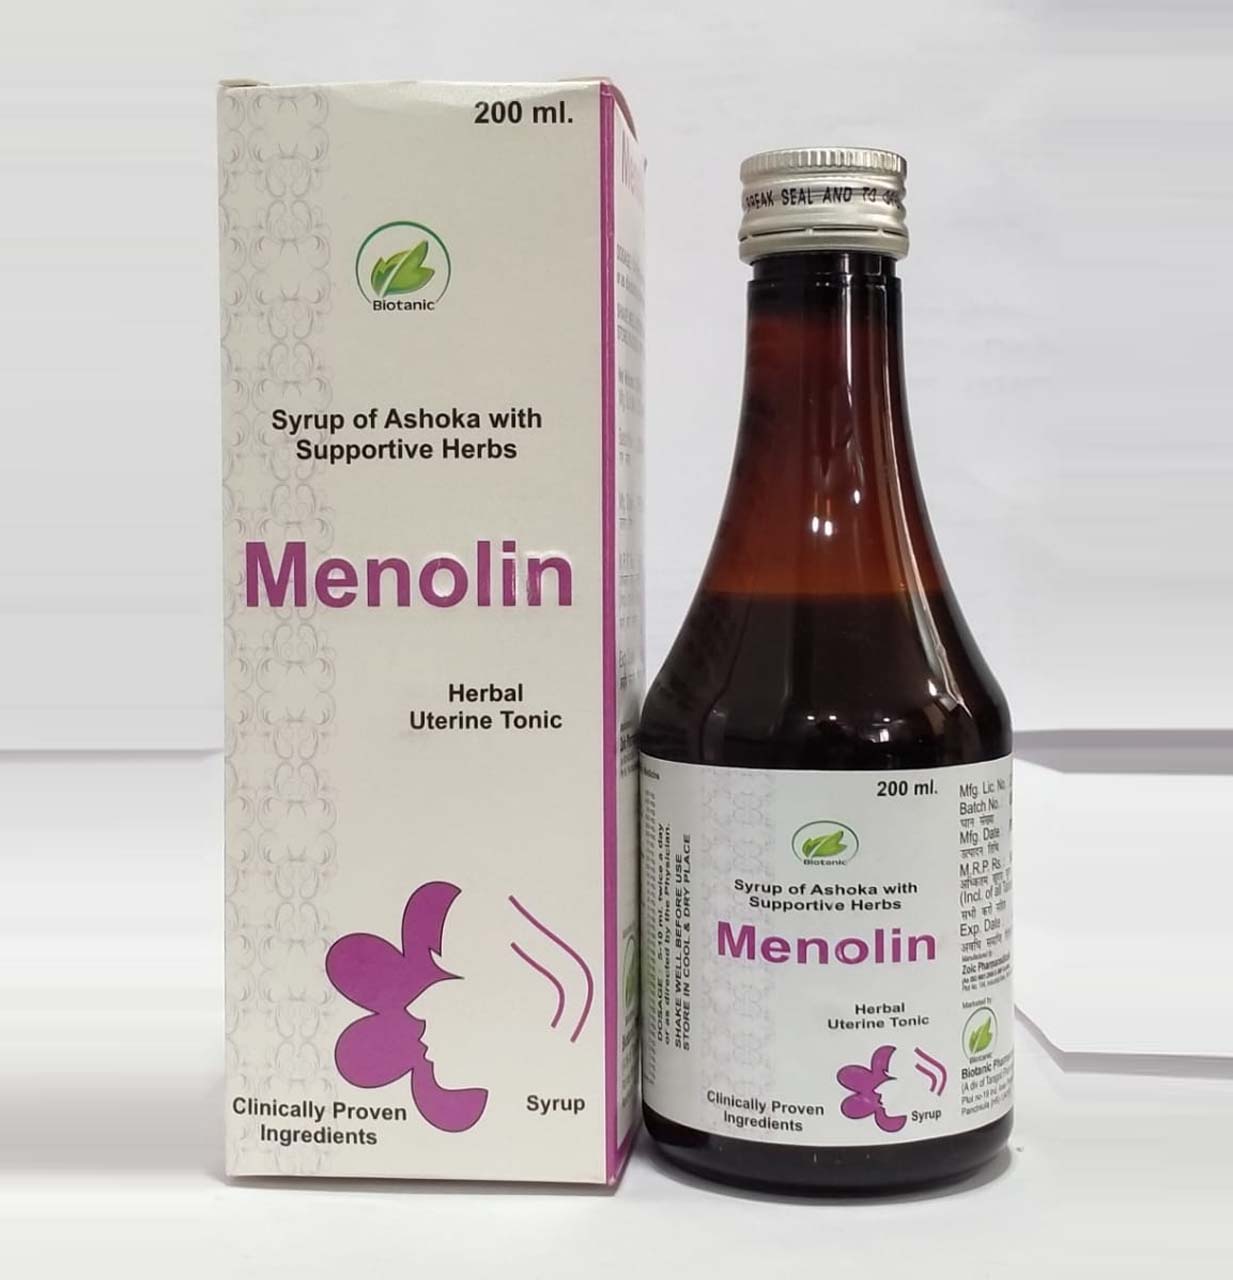 Product Name: Menolin, Compositions of Menolin are Syrup of Ashokan with Supportive Herbs - Biotanic Pharmaceuticals